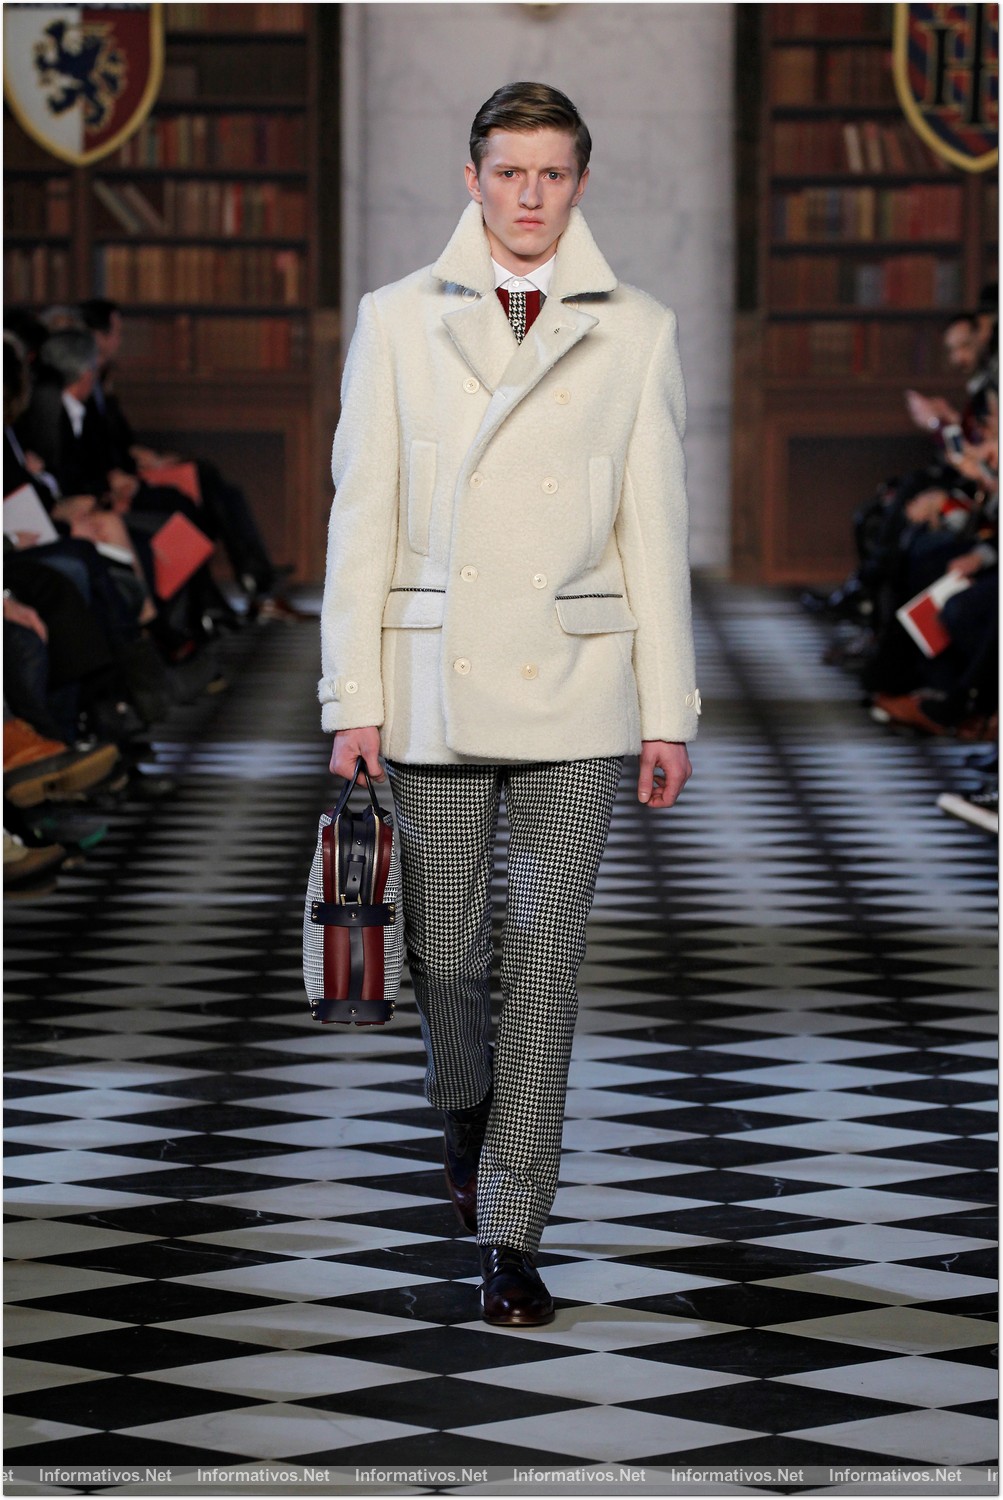 NY08FEB013.- Desfile Tommy Hilfiger Fall 2013 Men's Collection. 21. ALEXANDER